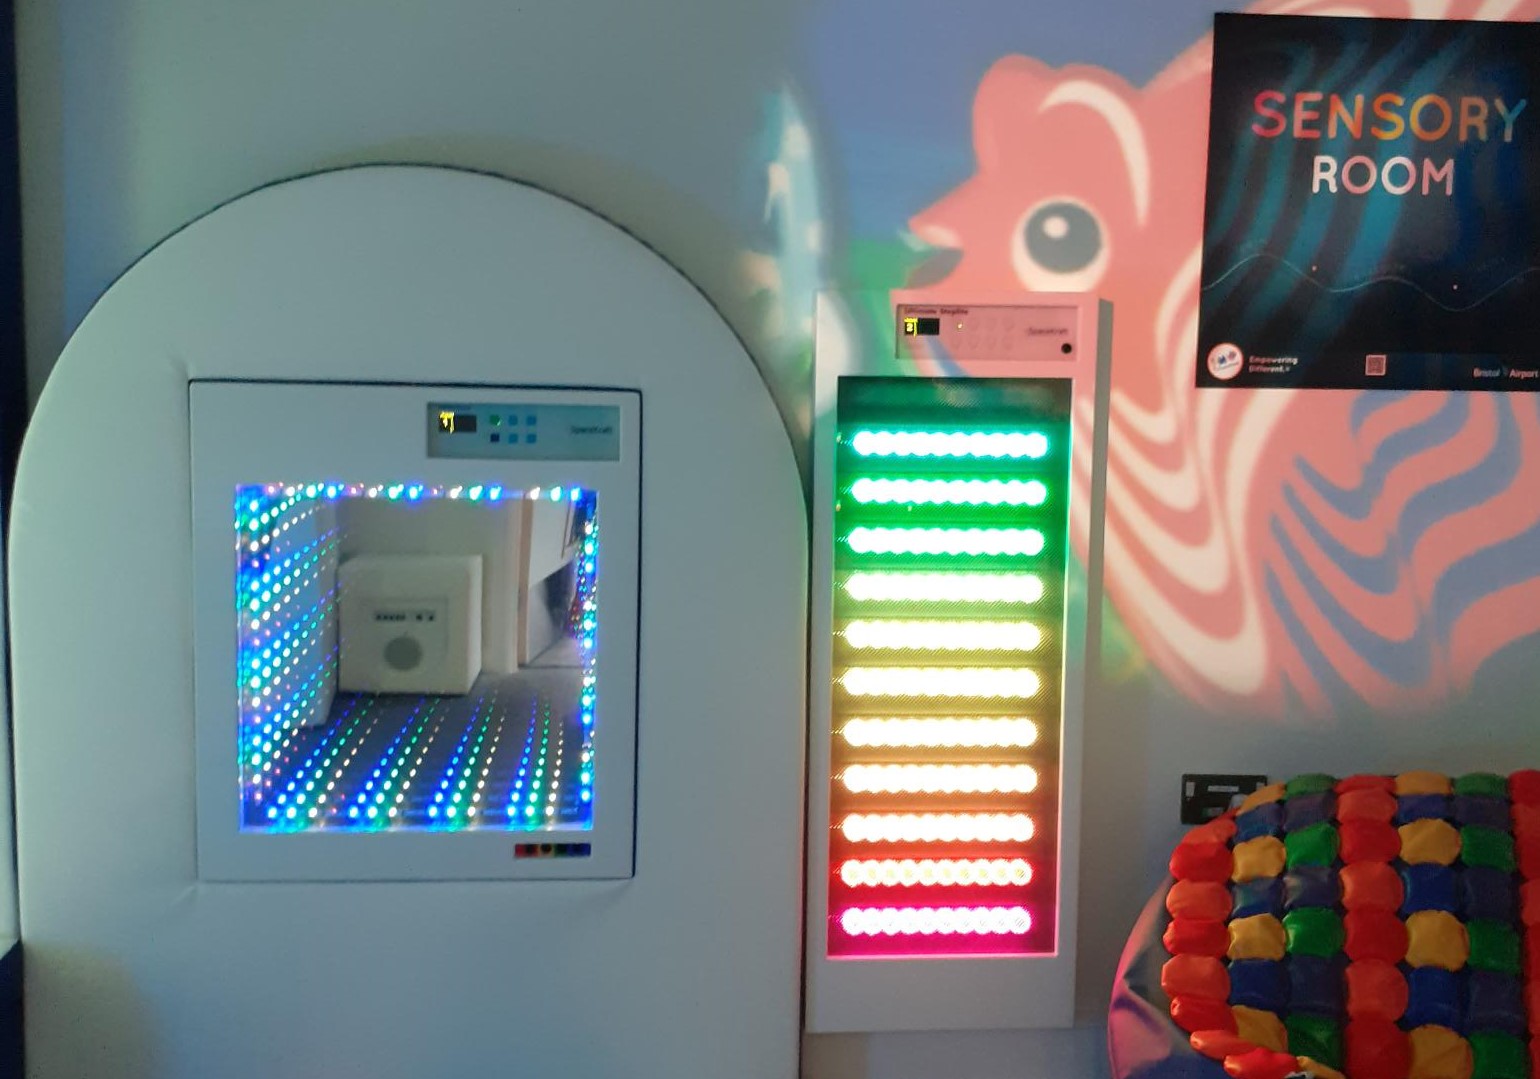 Bristol Airport launches immersive sensory room for departing passengers